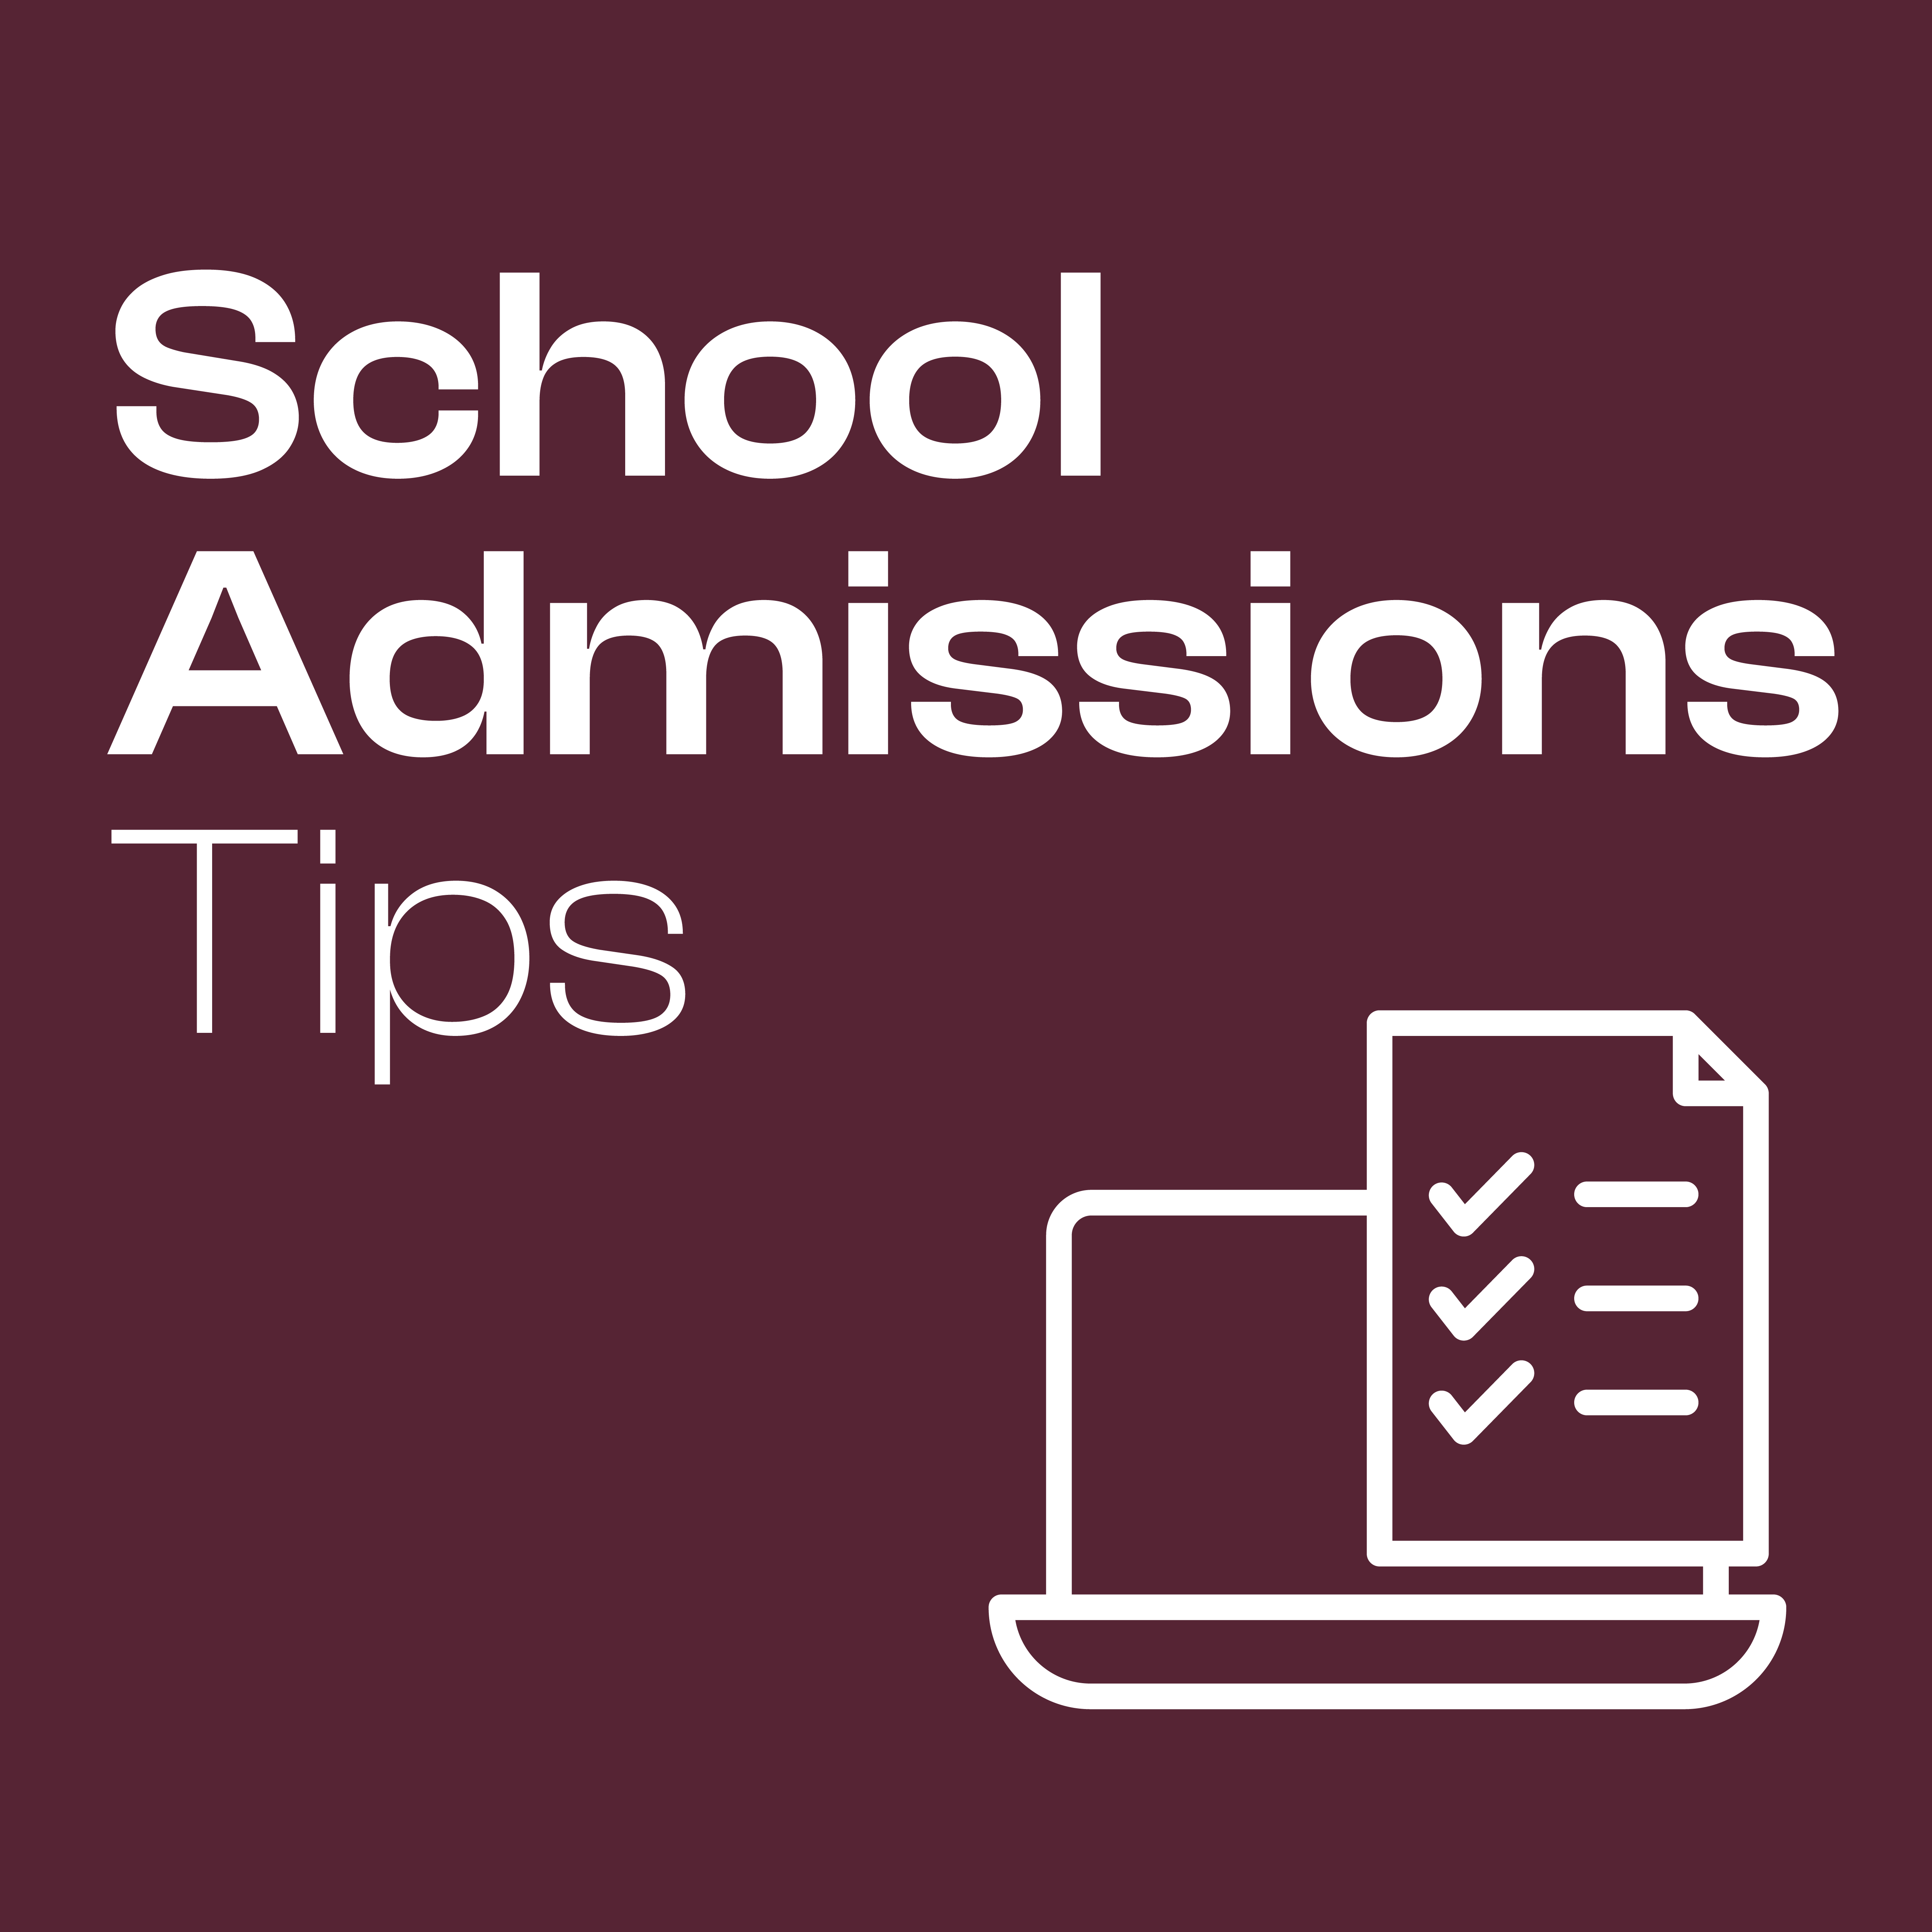 Admissions Tips